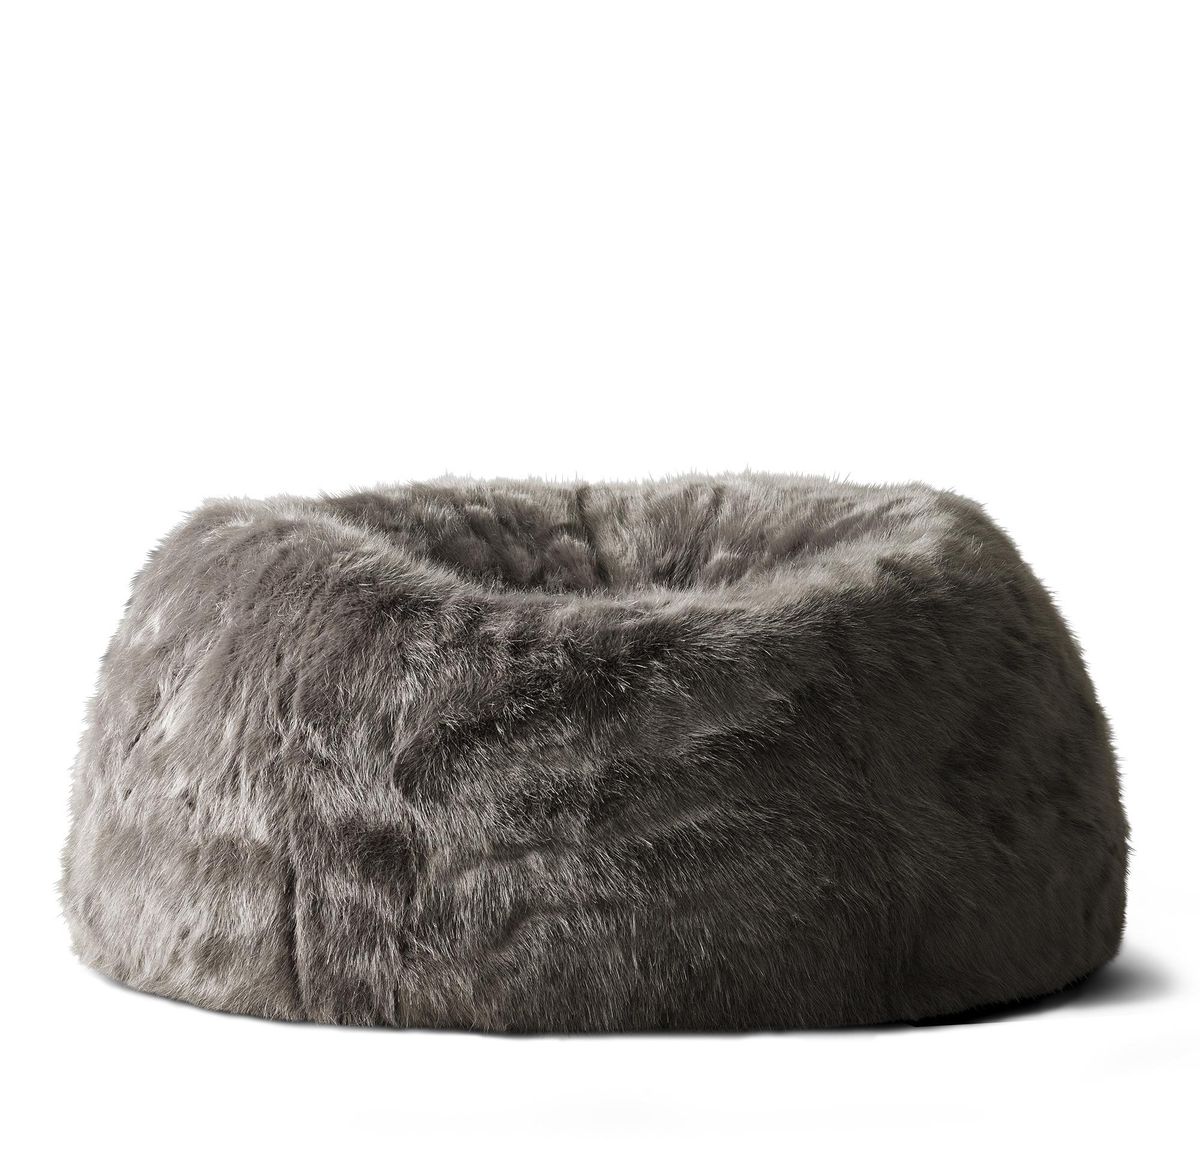 This Restoration Hardware faux fur bean bag chair satisfies several of the hygge trend’s characteristics, including comfort, warmth and softness. (Associated Press photos)